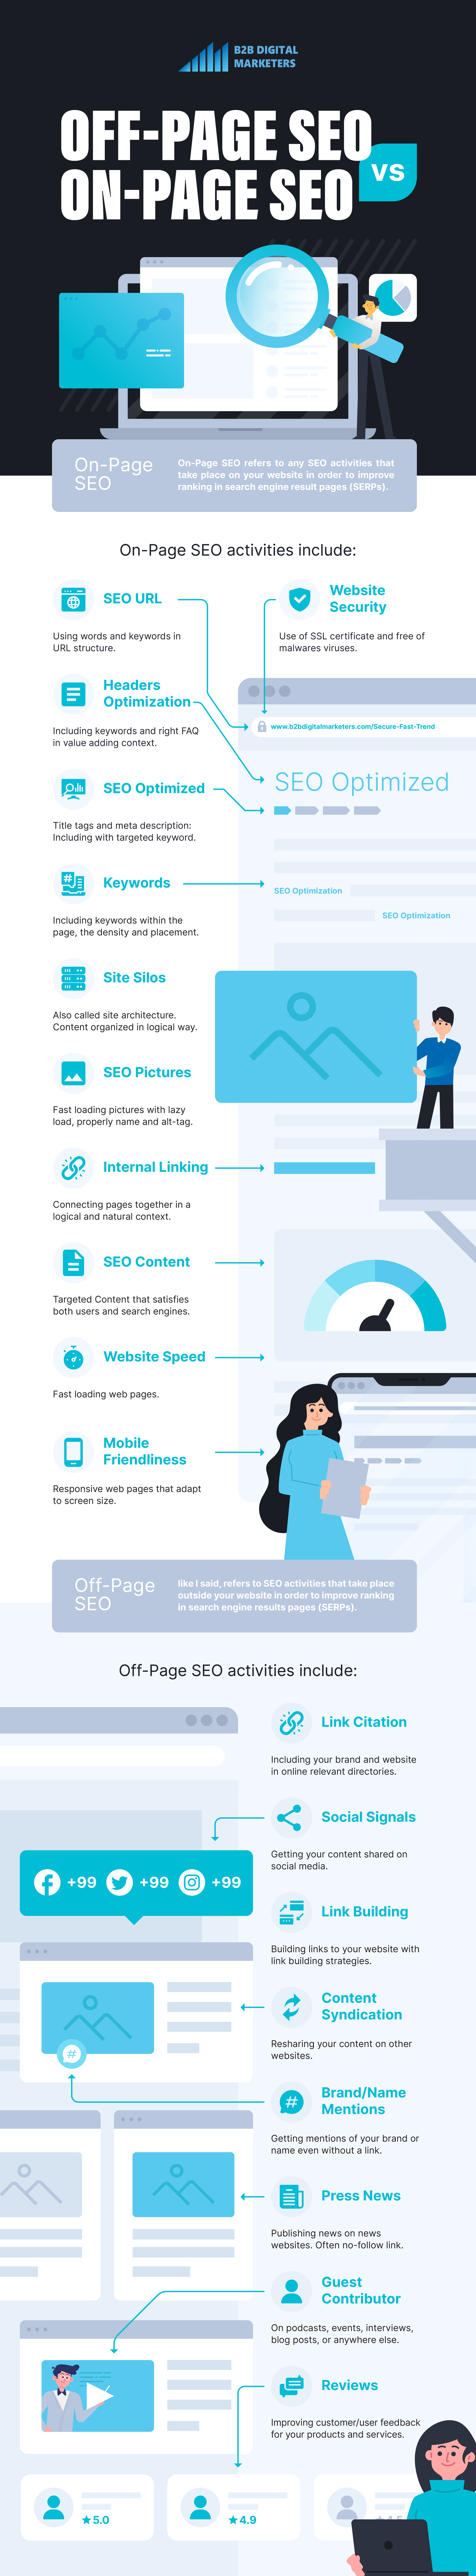 on-page SEO vs Off-Page SEO infographic